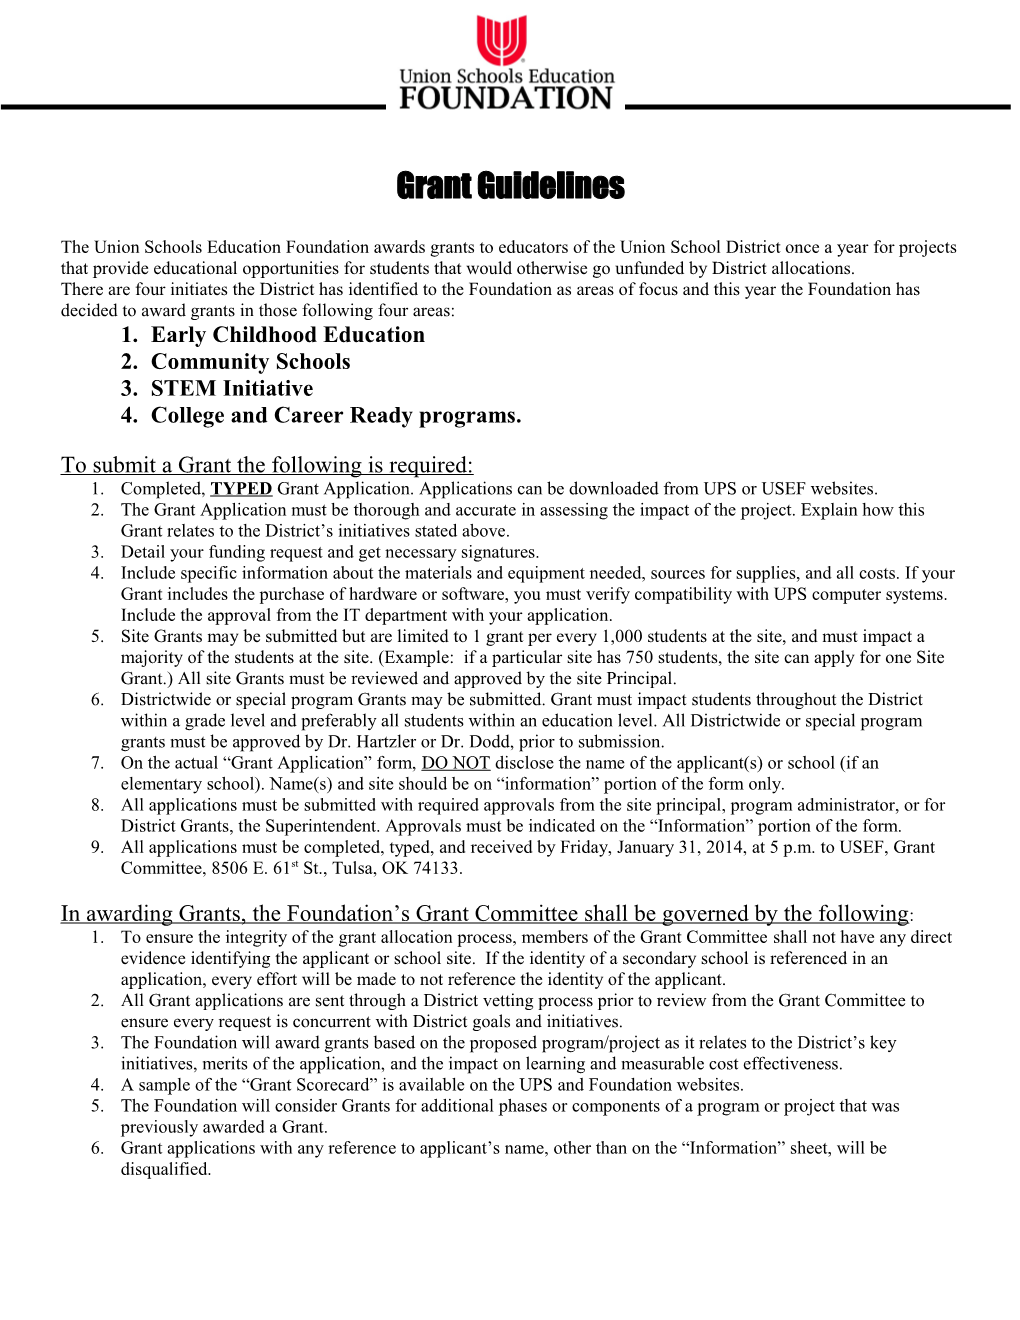 Education Grant Guidelines